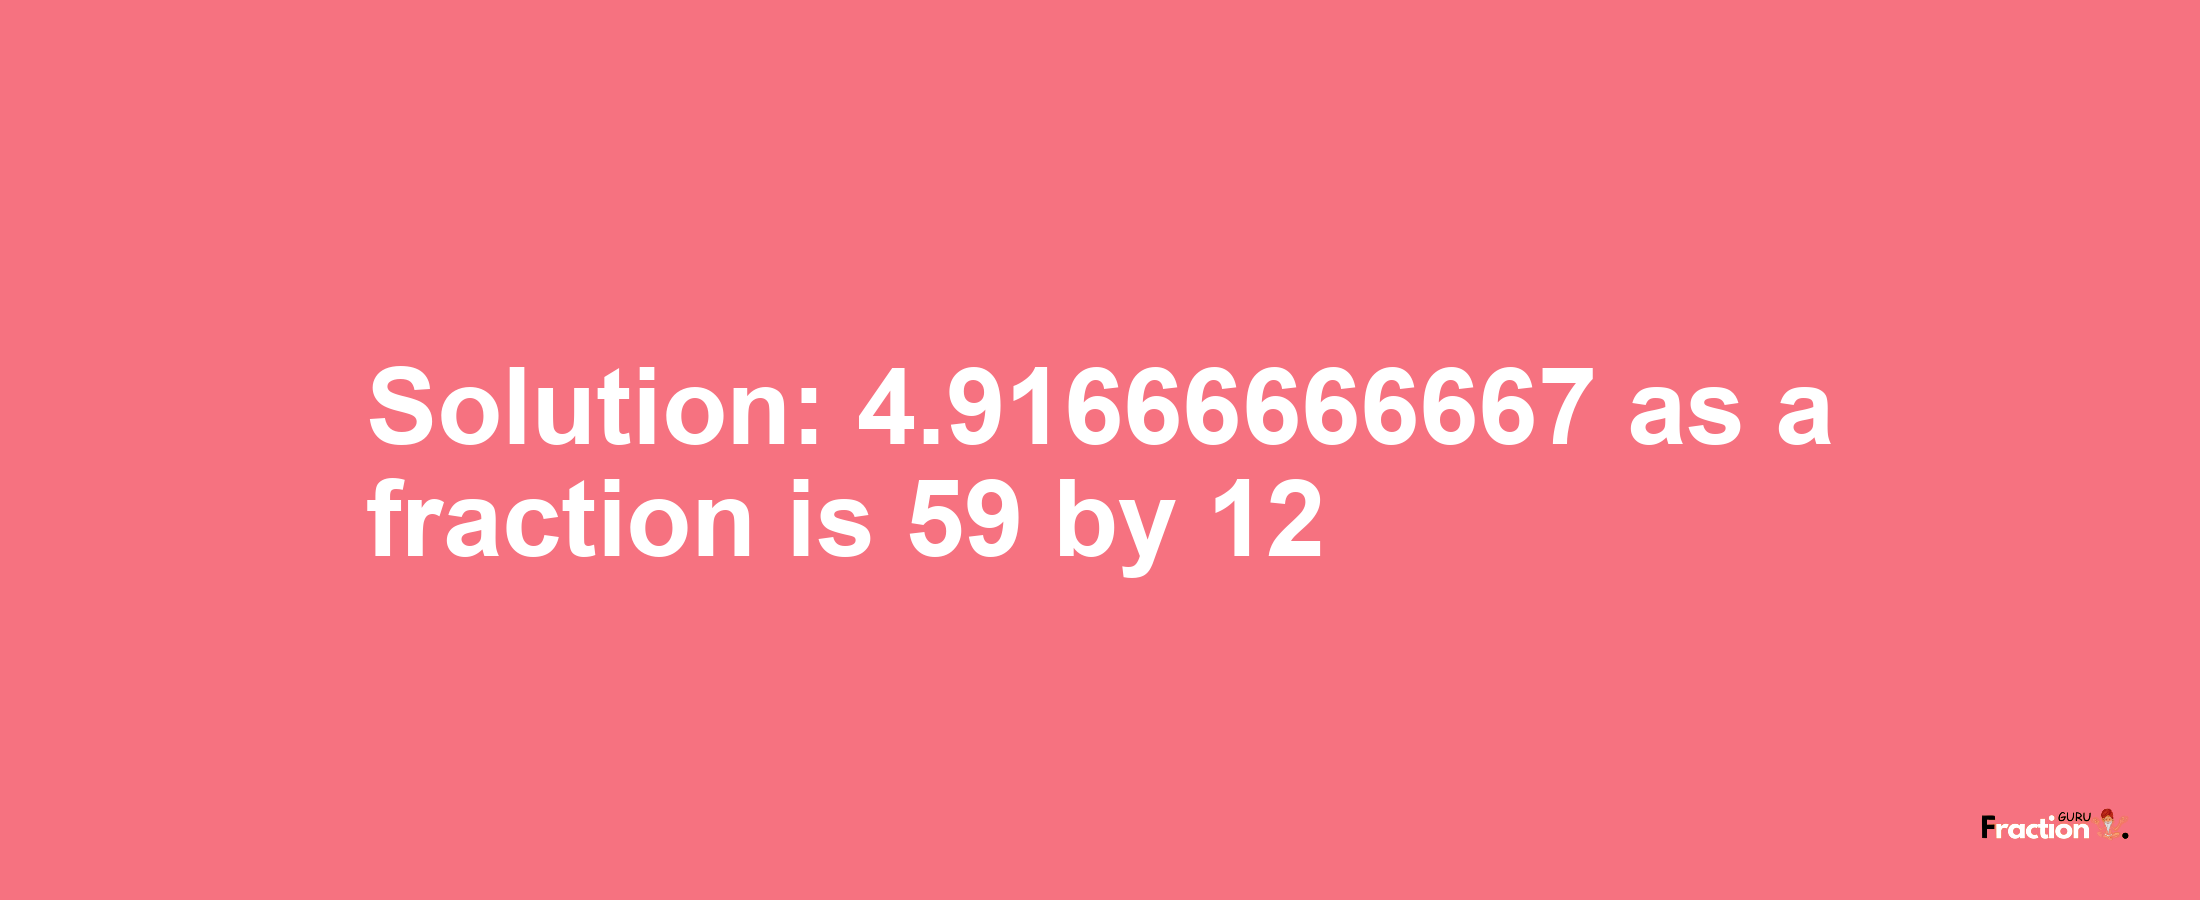 Solution:4.91666666667 as a fraction is 59/12